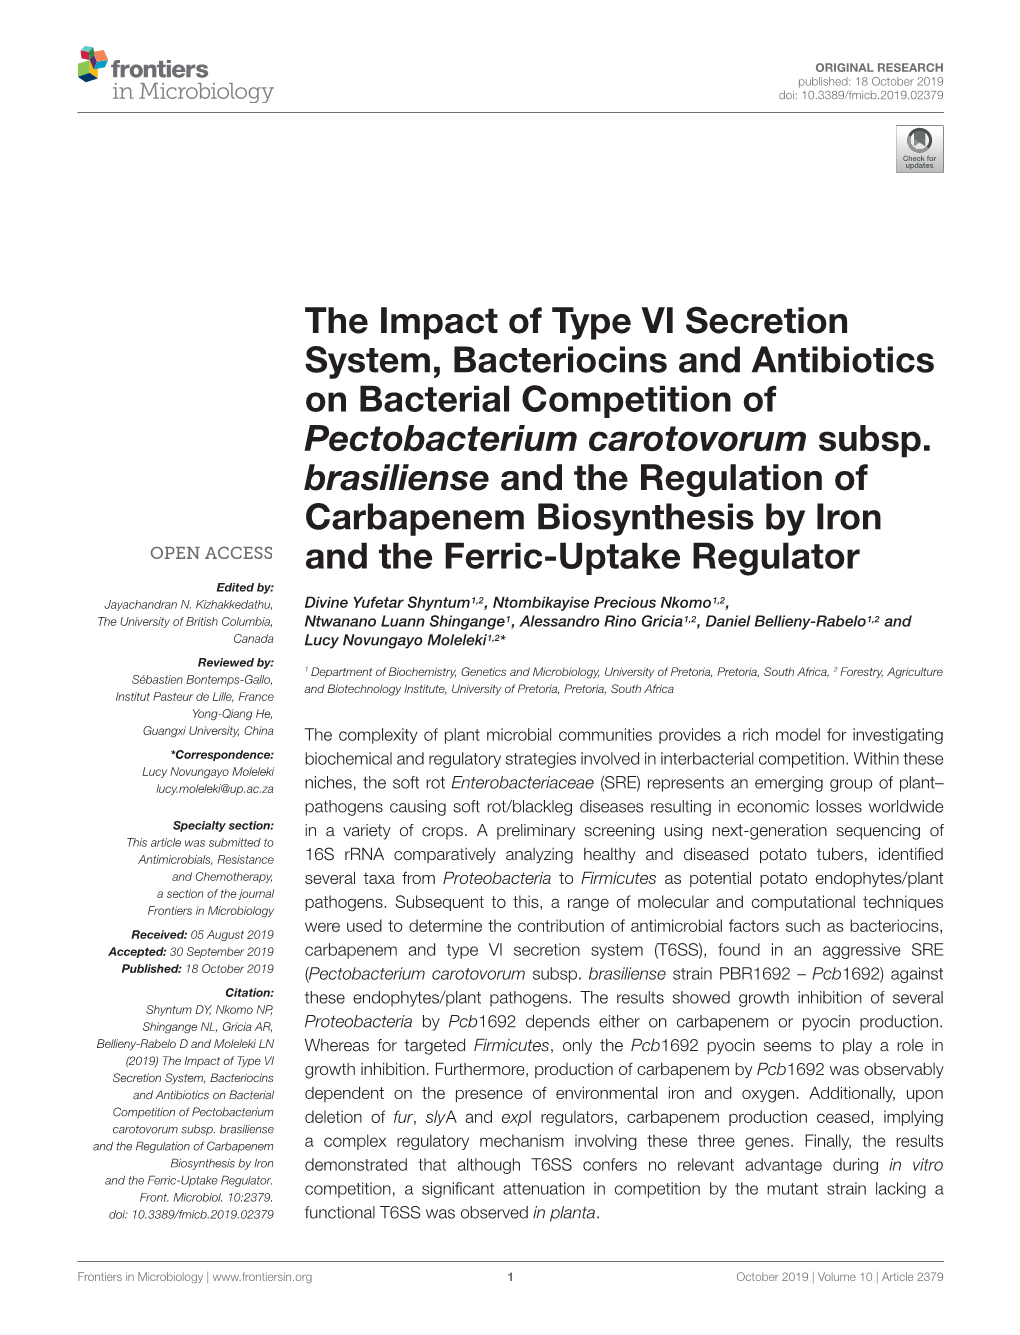 The Impact of Type VI Secretion System, Bacteriocins and Antibiotics on Bacterial Competition of Pectobacterium Carotovorum Subsp